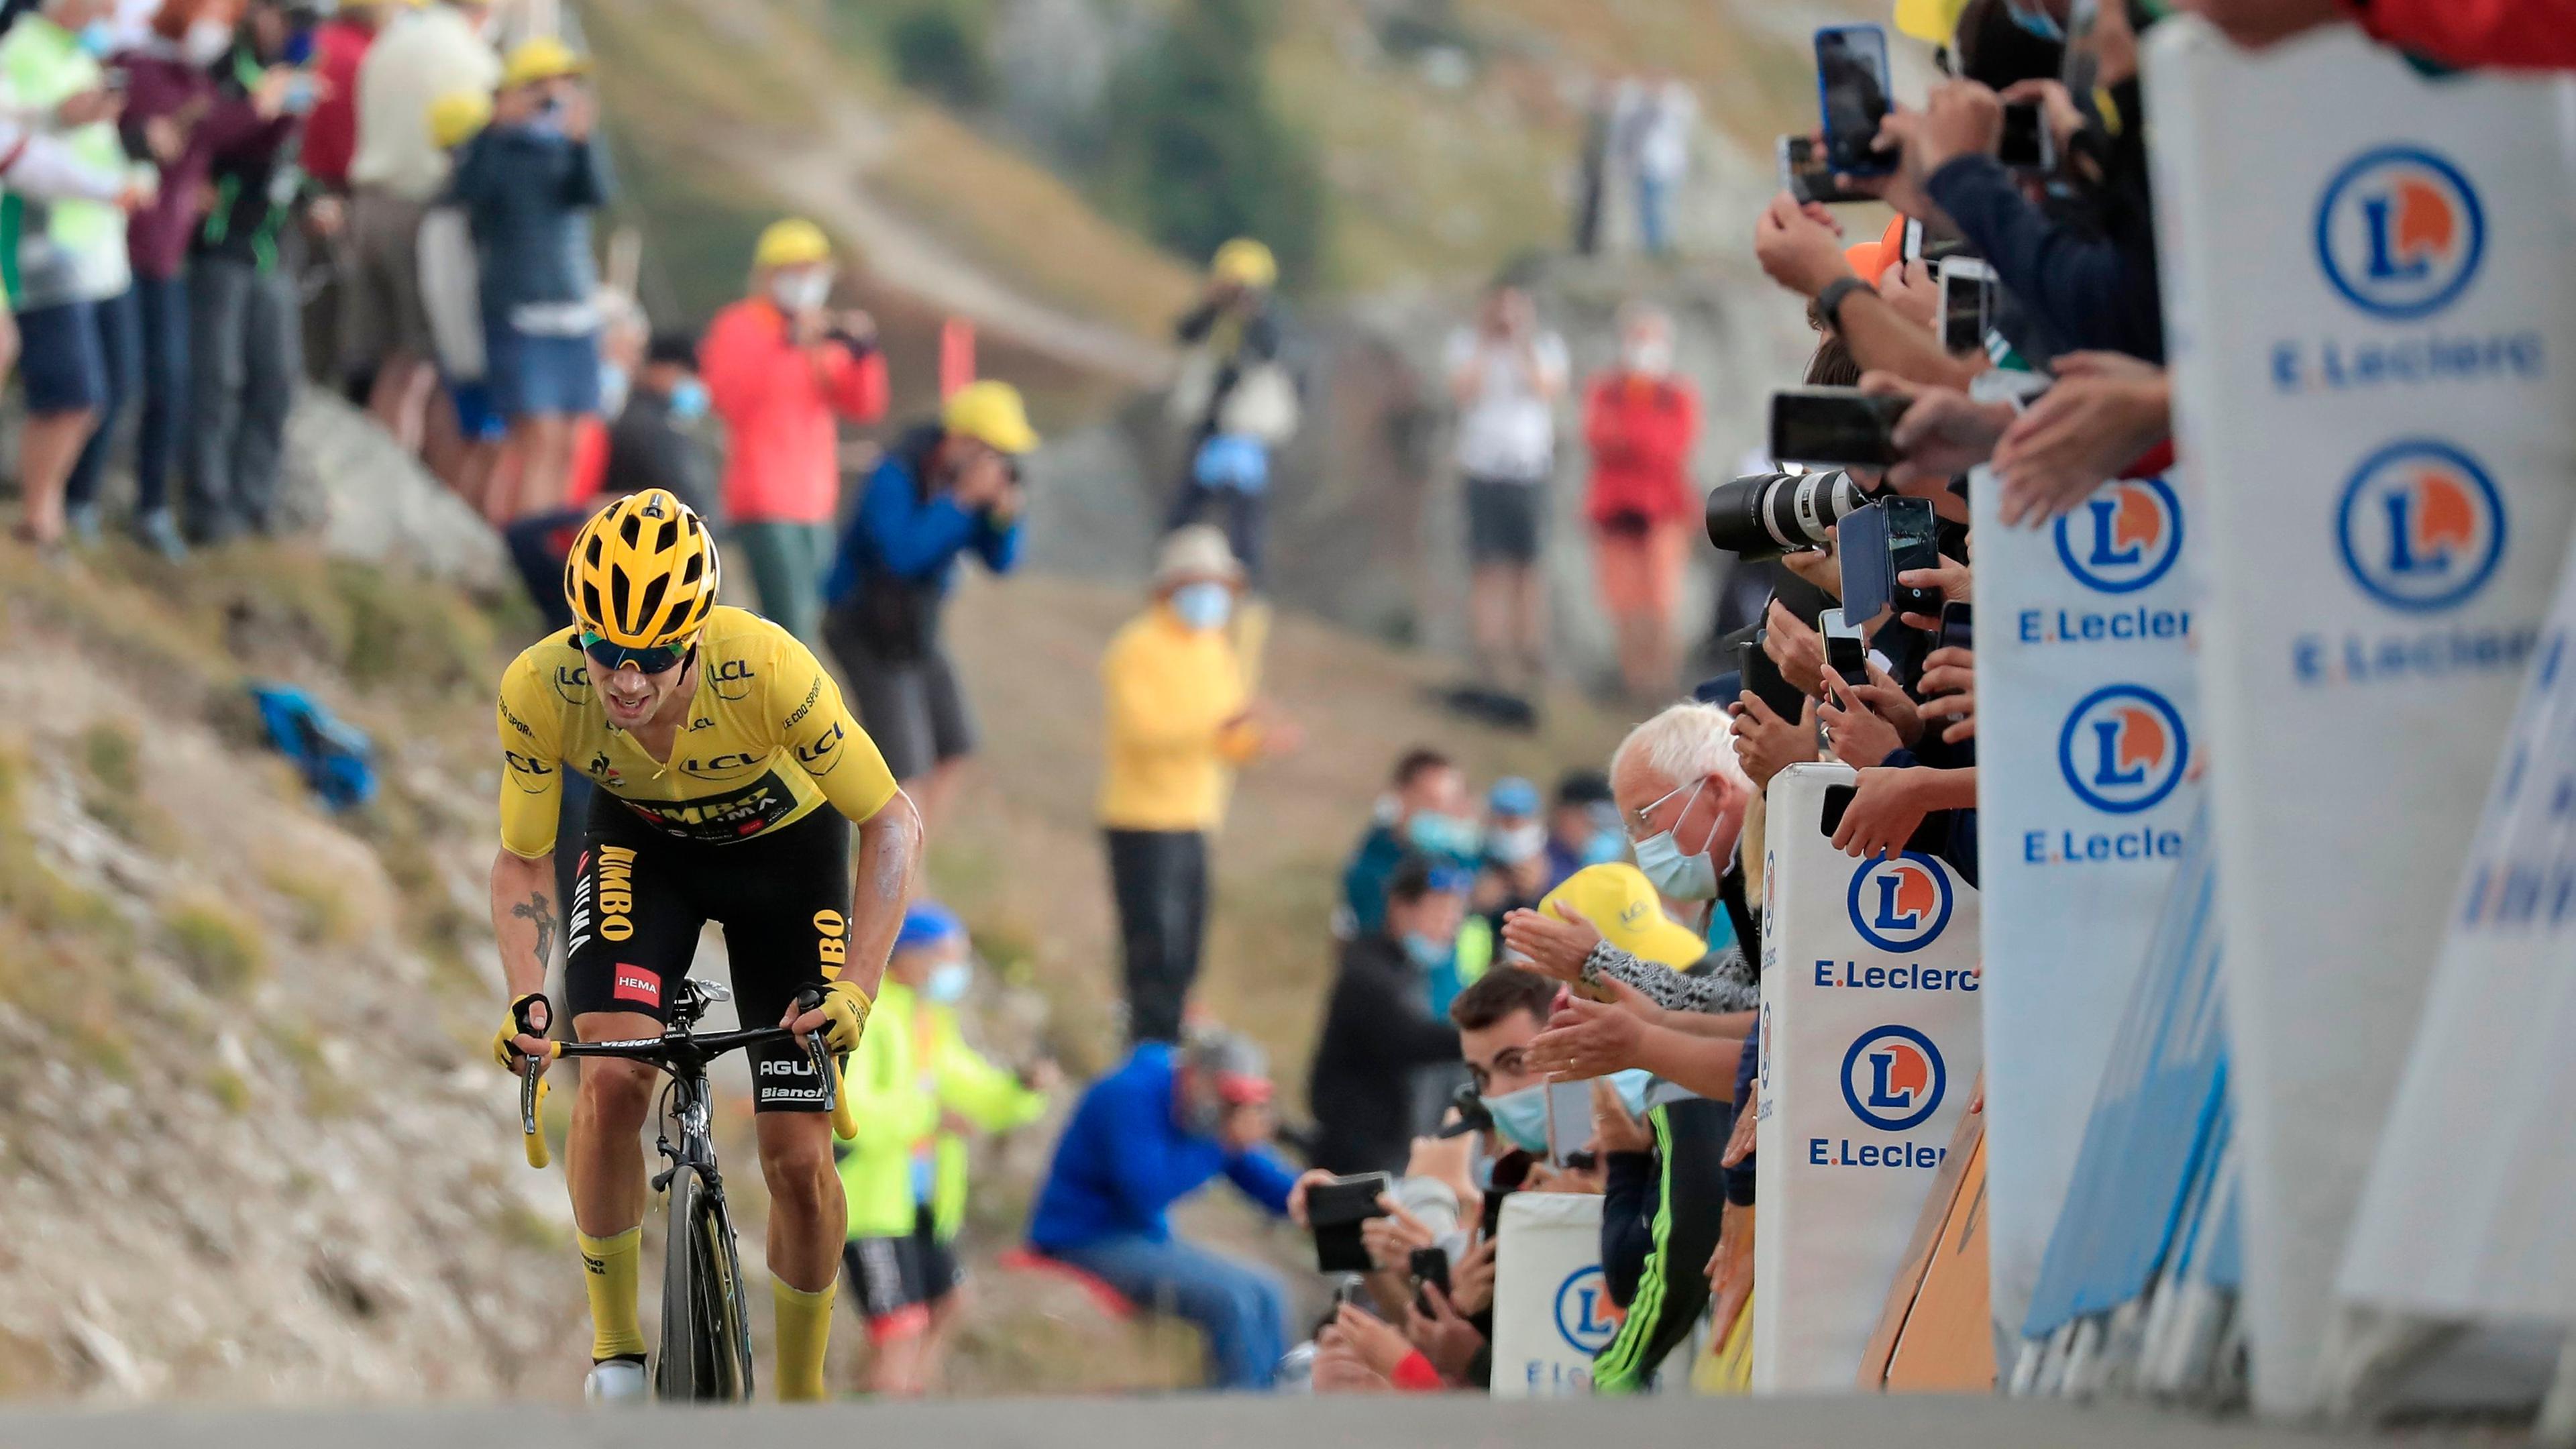 Team Jumbo rider Slovenia's Primoz Roglic wearing the overall leader's yellow jersey crosses the finish line atop the Loze pass (Col de la Loze) at the end of the 17th stage of the 107th edition of the Tour de France cycling race, 170 km between Grenoble and Meribel, on September 16, 2020. (Photo by christophe petit tesson / POOL / AFP)